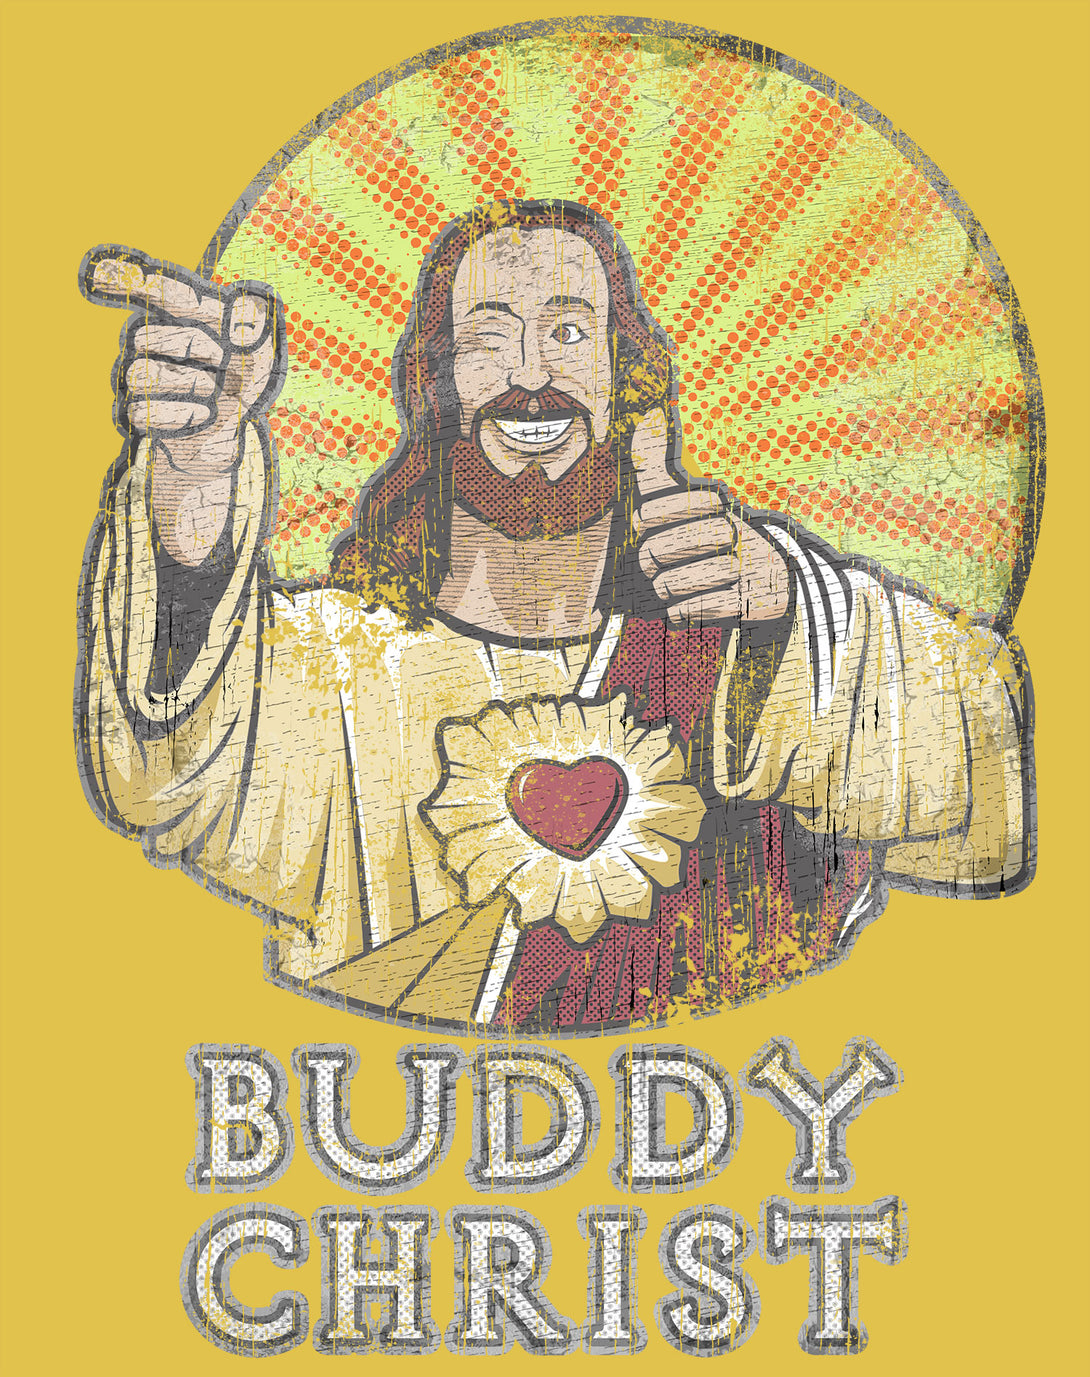 Kevin Smith View Askewniverse Buddy Christ Got Summer Vintage Variant Official Women's T-Shirt Yellow - Urban Species Design Close Up